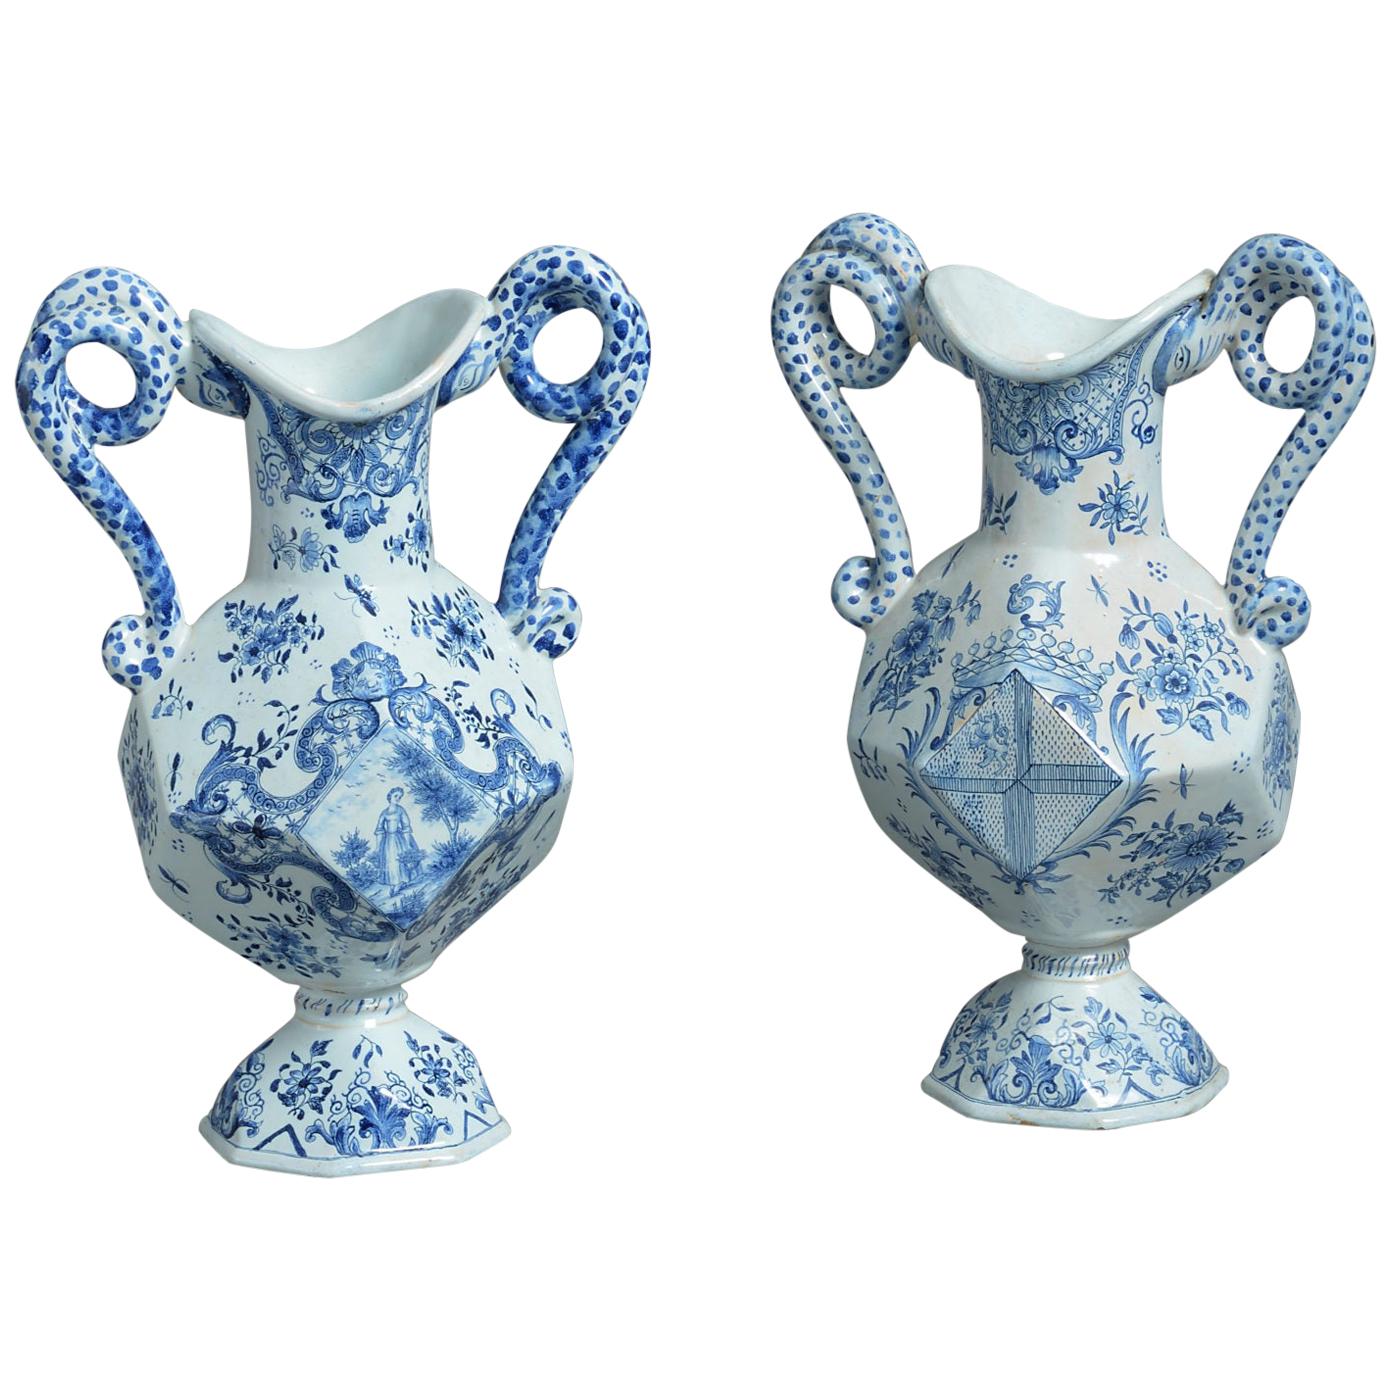 Pair of Blue and White Faience Pottery Vases